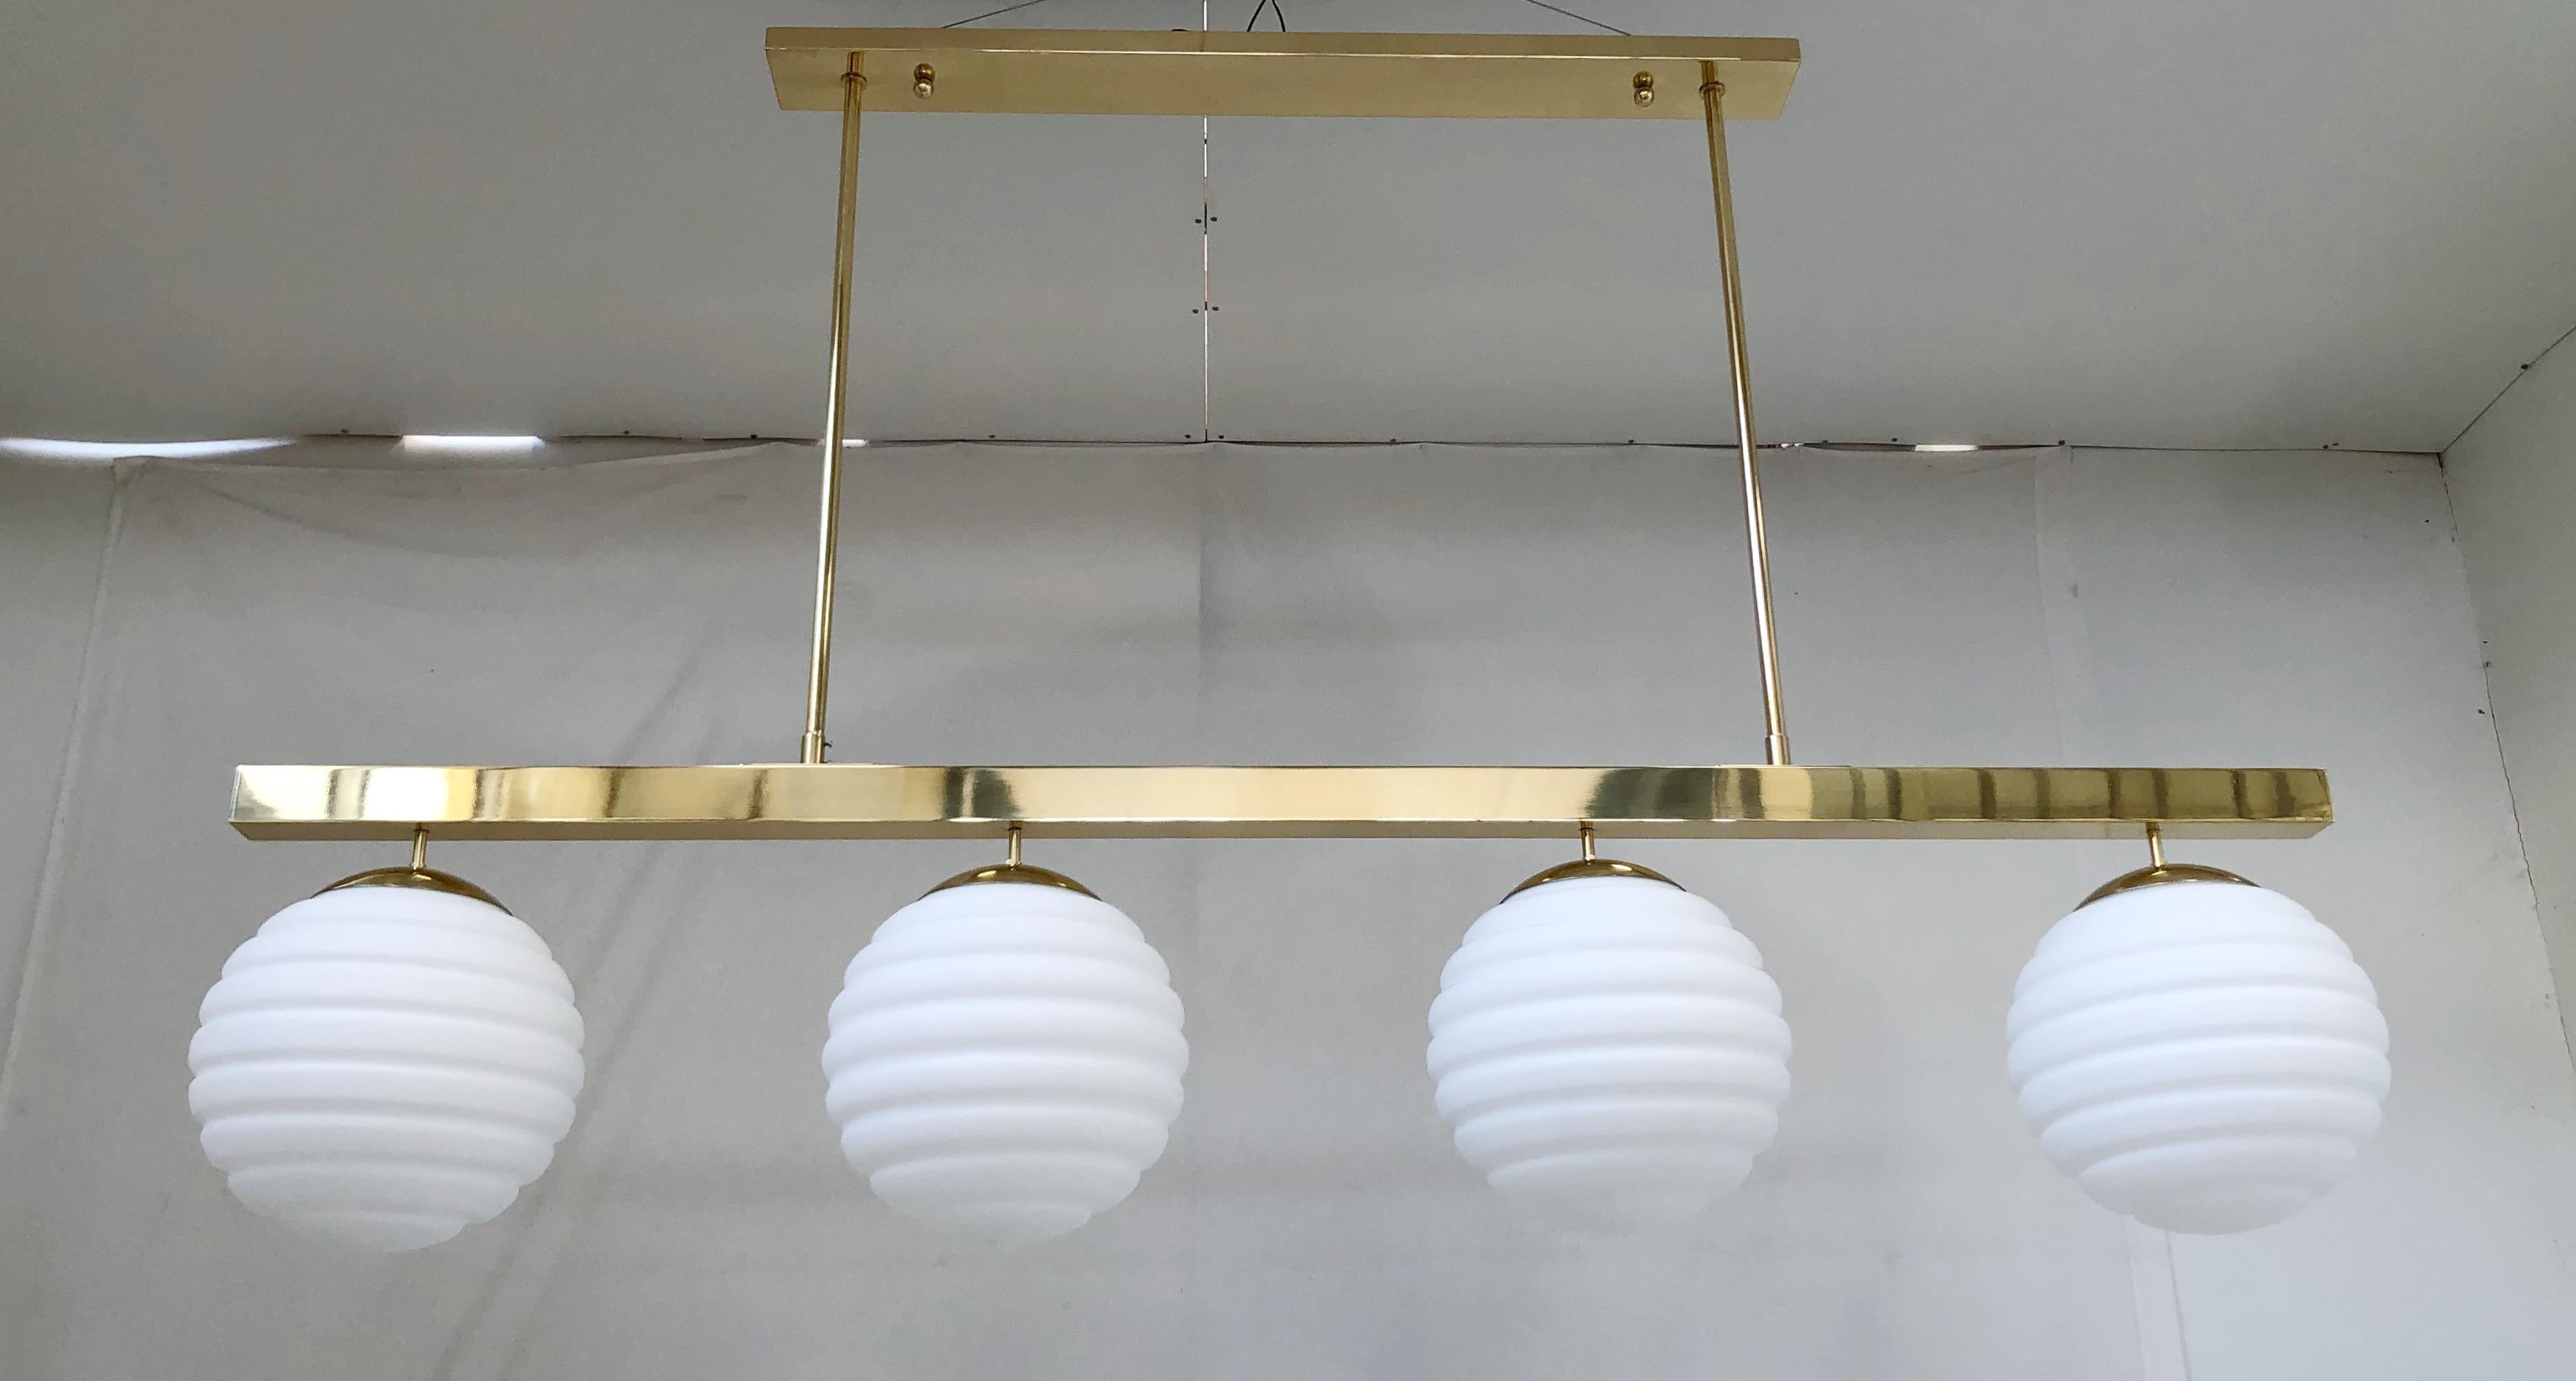 Italian pendant chandelier shown in white ribbed Murano glass globes, mounted on polished brass frame / Designed by Fabio Bergomi for Fabio Ltd / Made in Italy
4 lights / E26 or E27 type / max 40W each
Measures: width 70 inches, depth 12 inches,